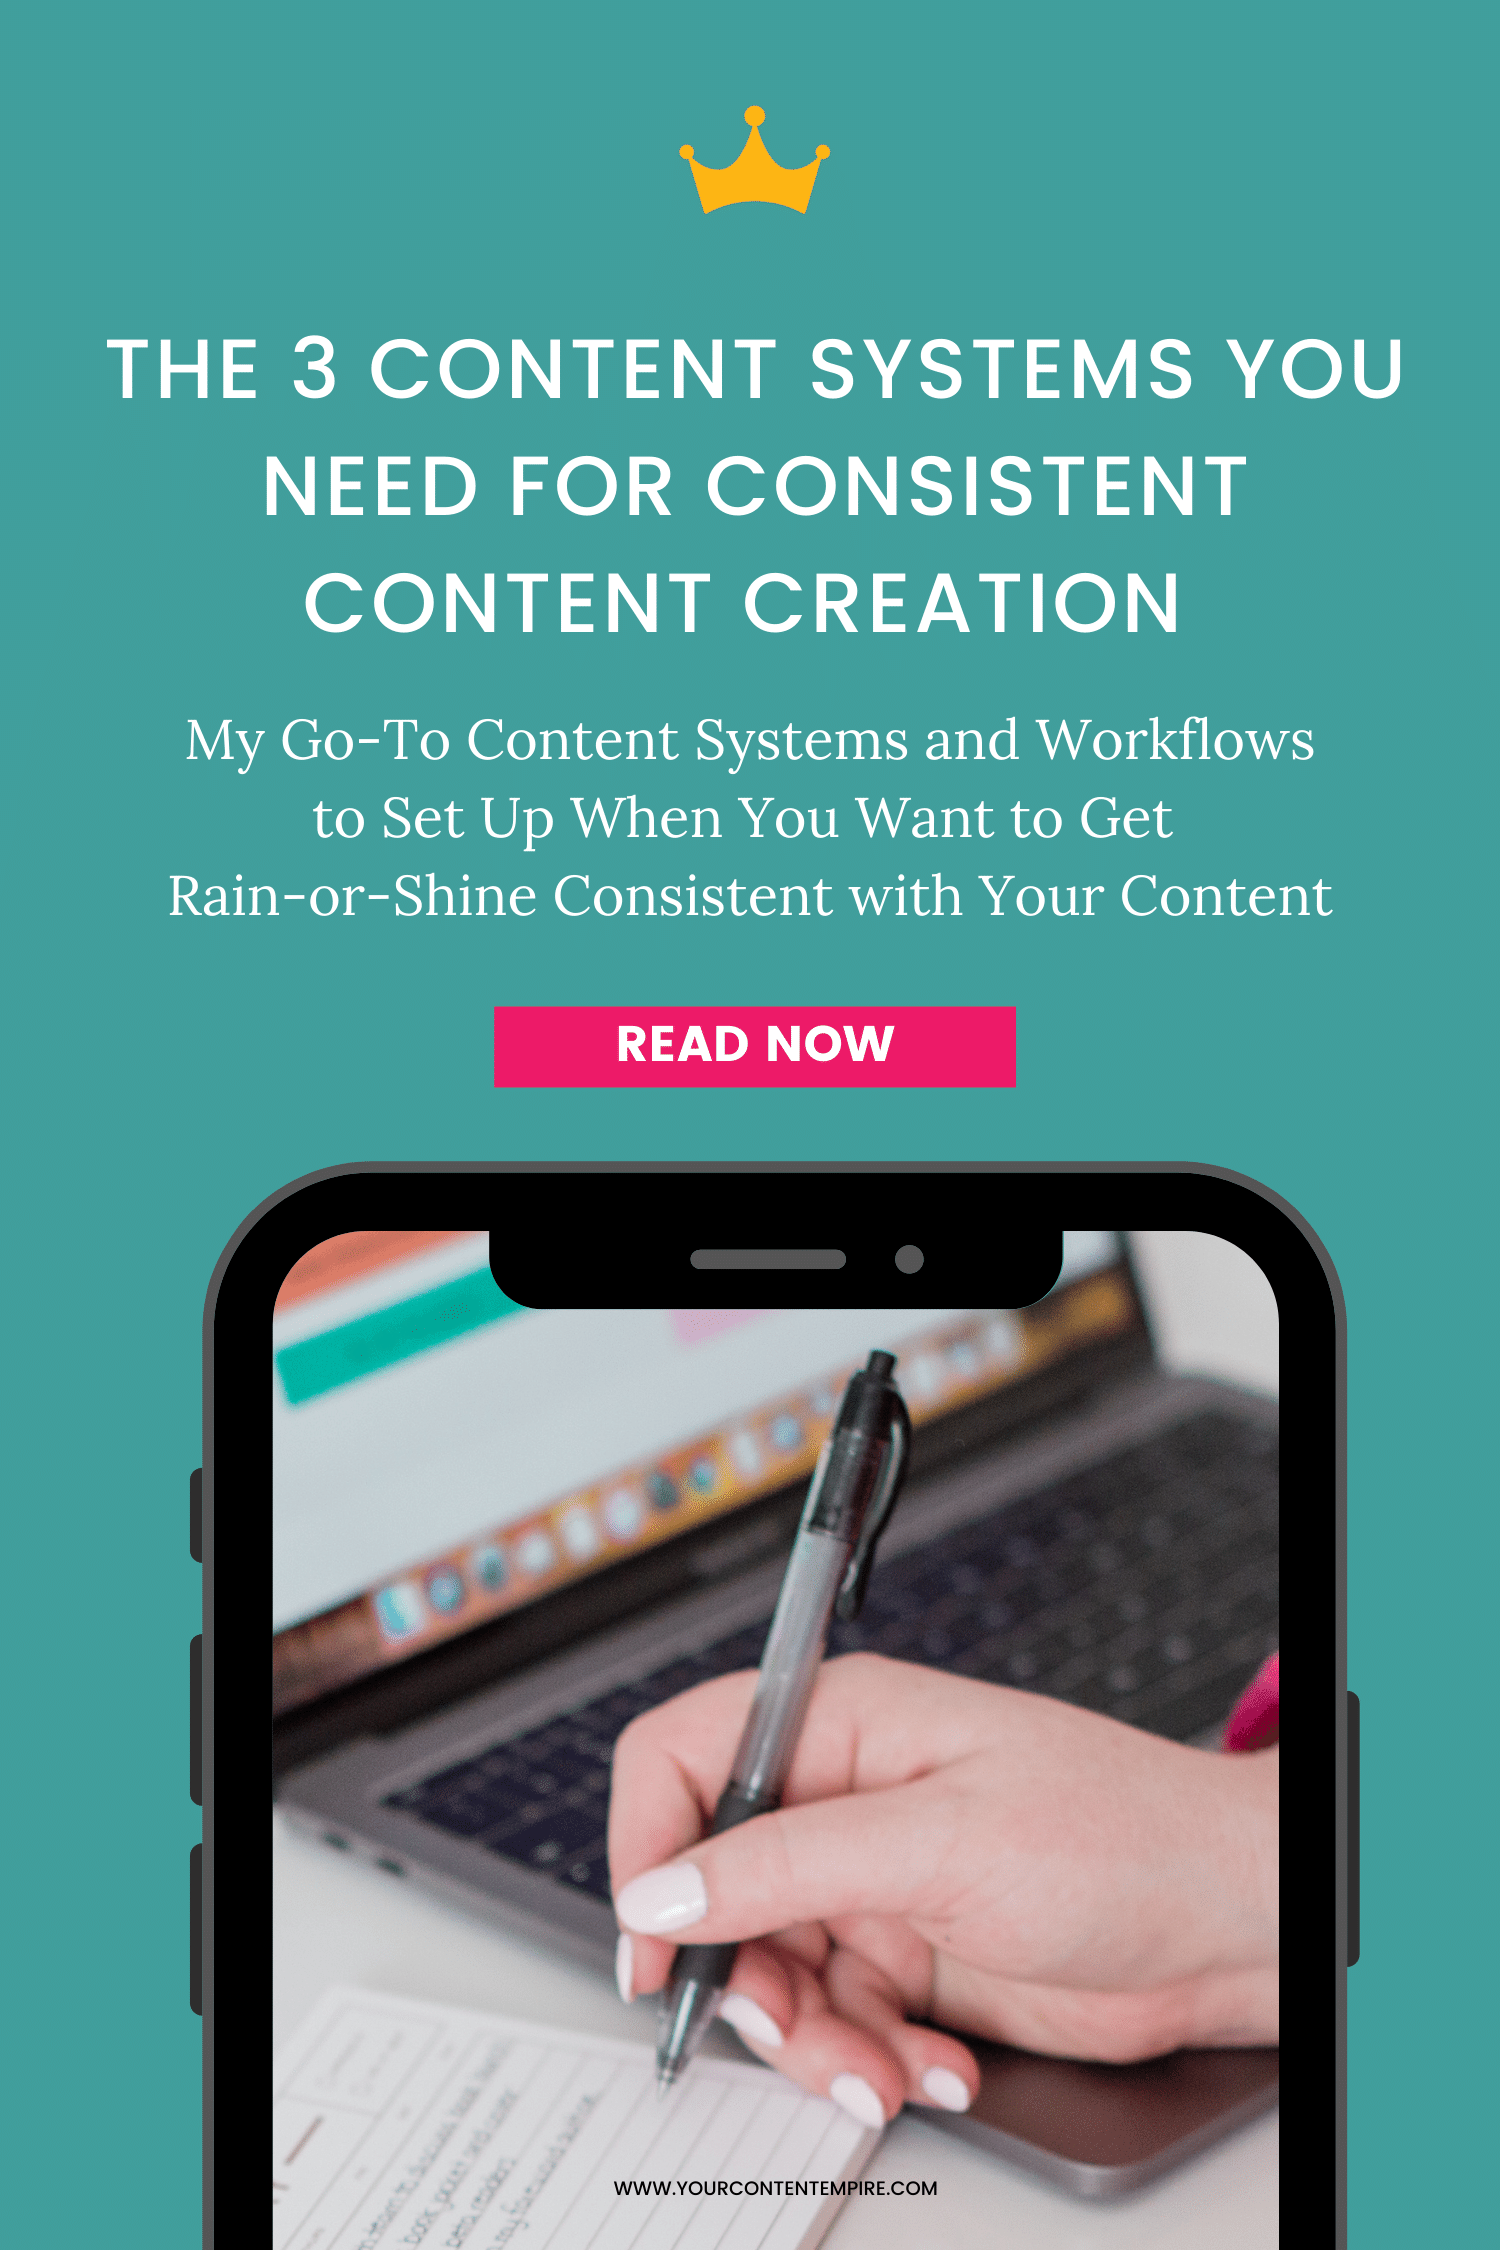 The 3 Content Systems You Need for Consistent Content Creation